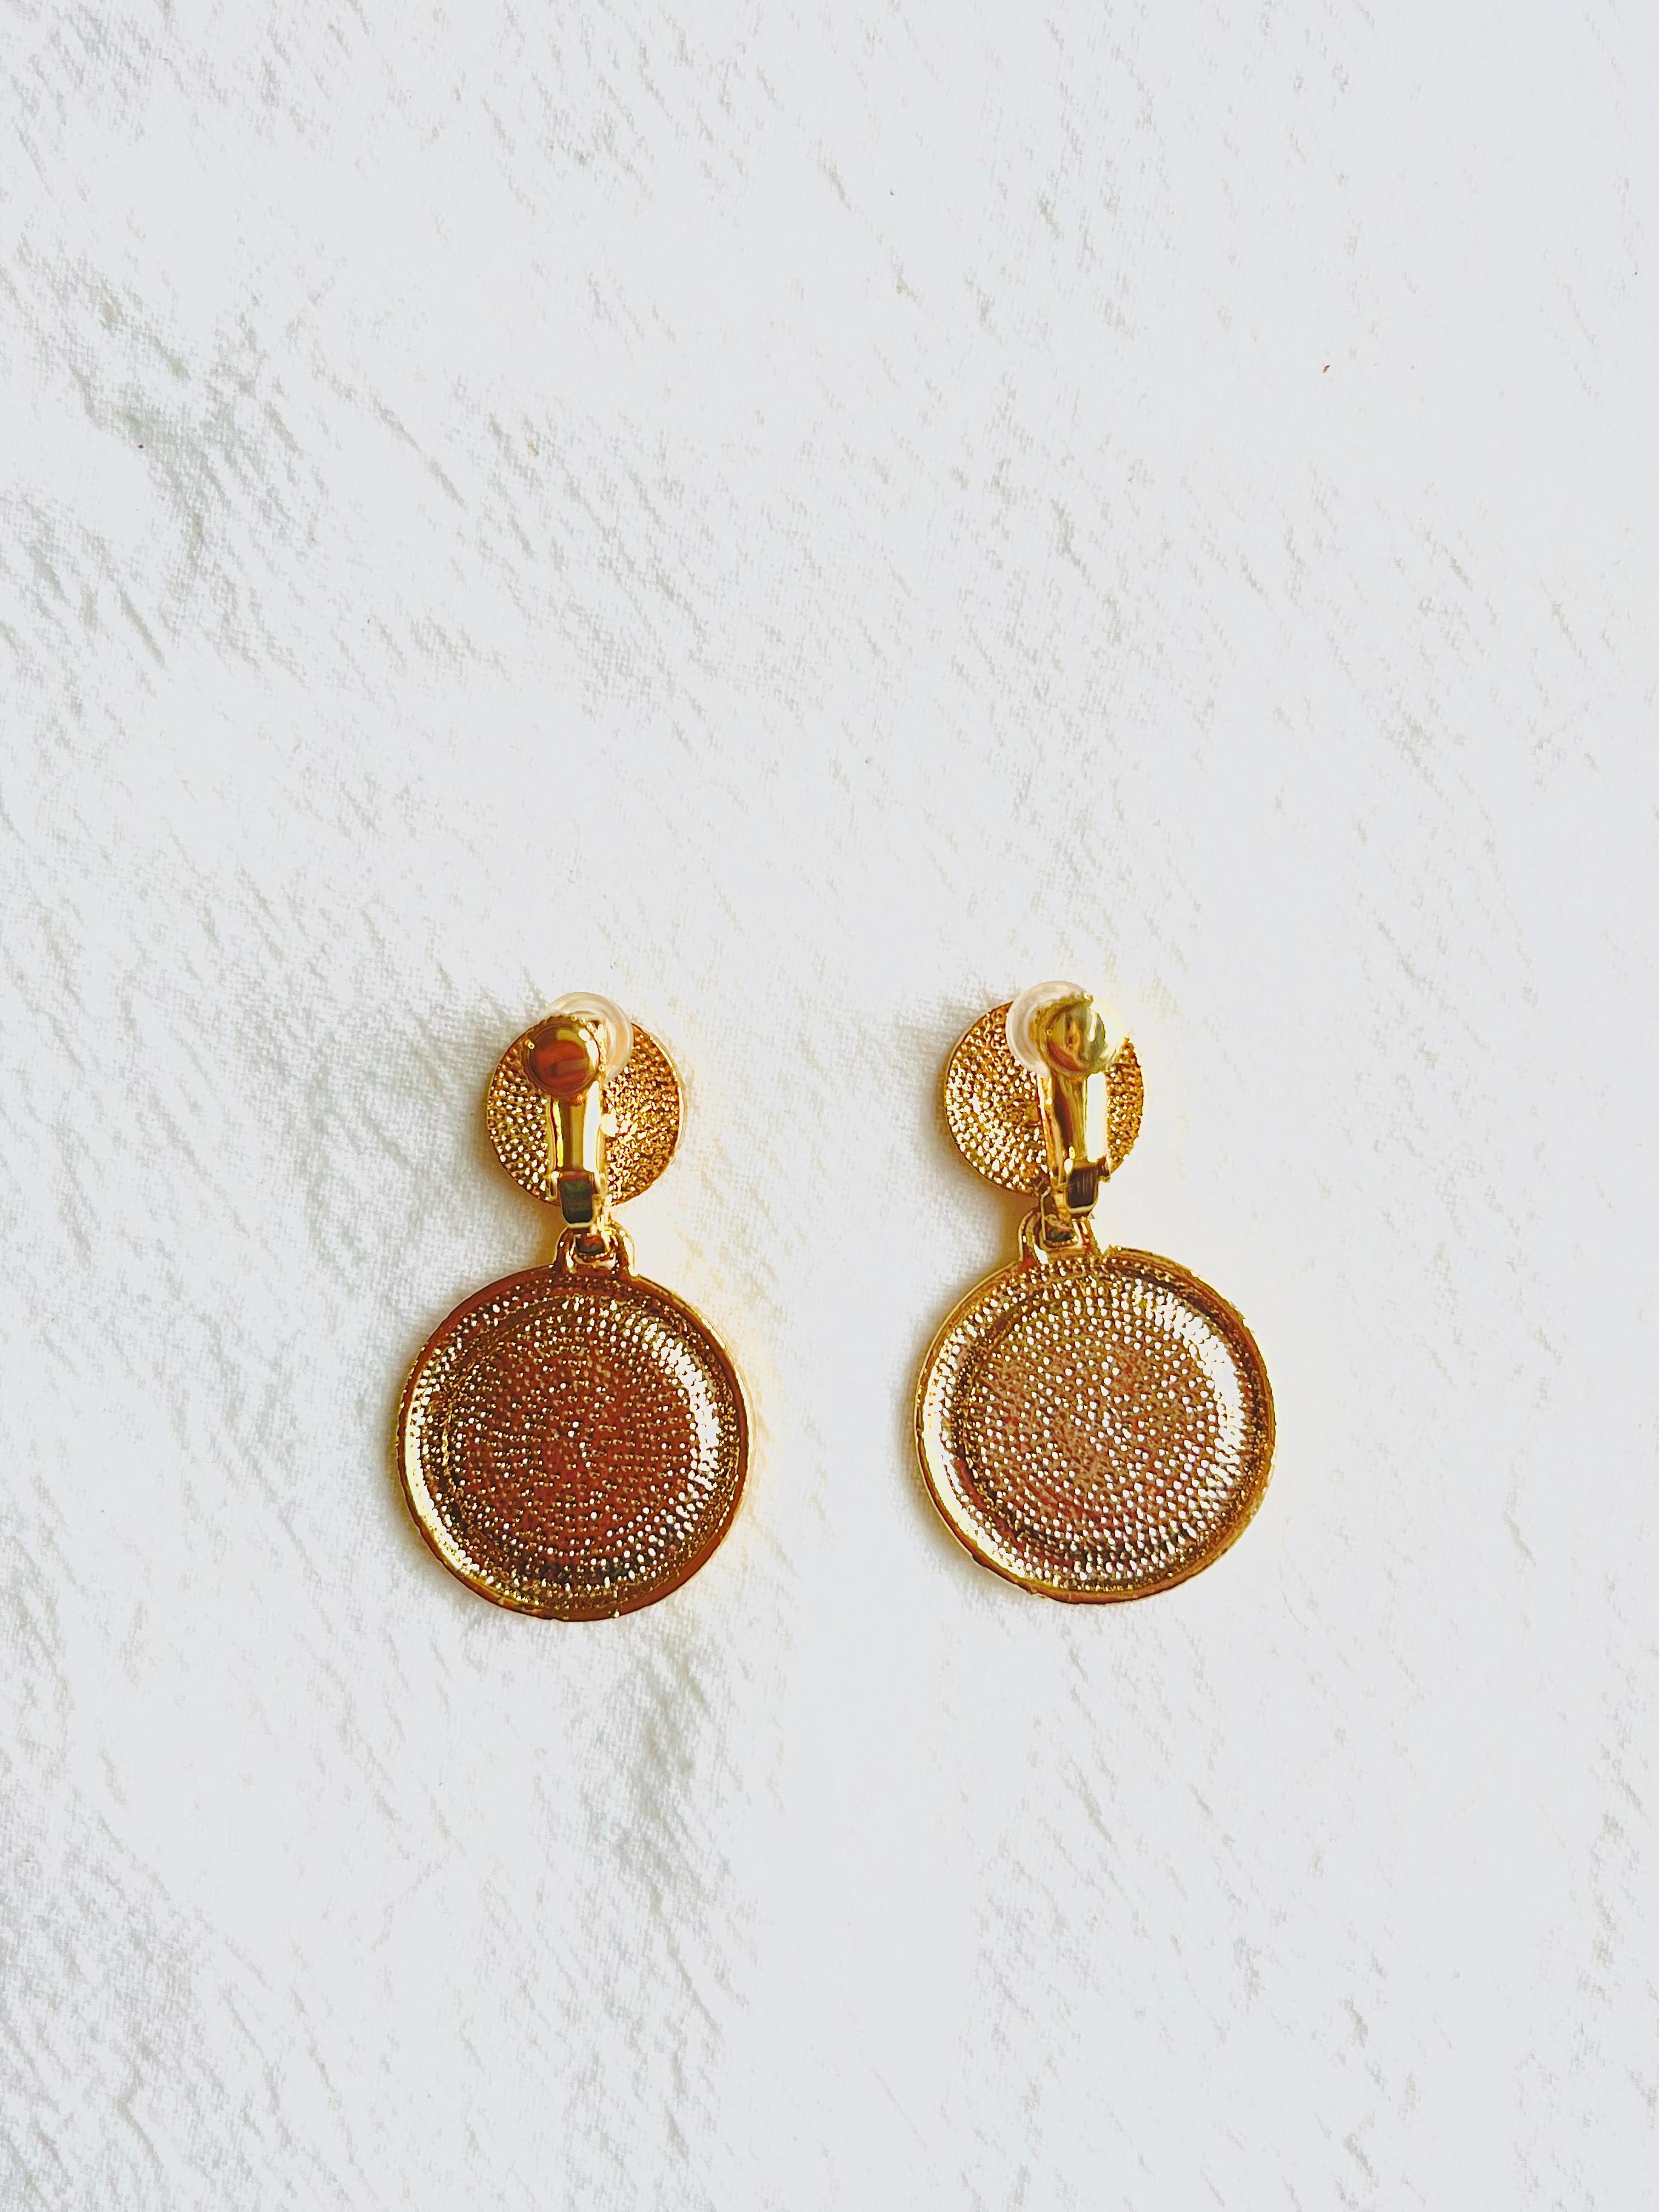 Brown Round Circular Pendant Textured Modernist Retro Gold Drop Clip Earrings For Sale 1